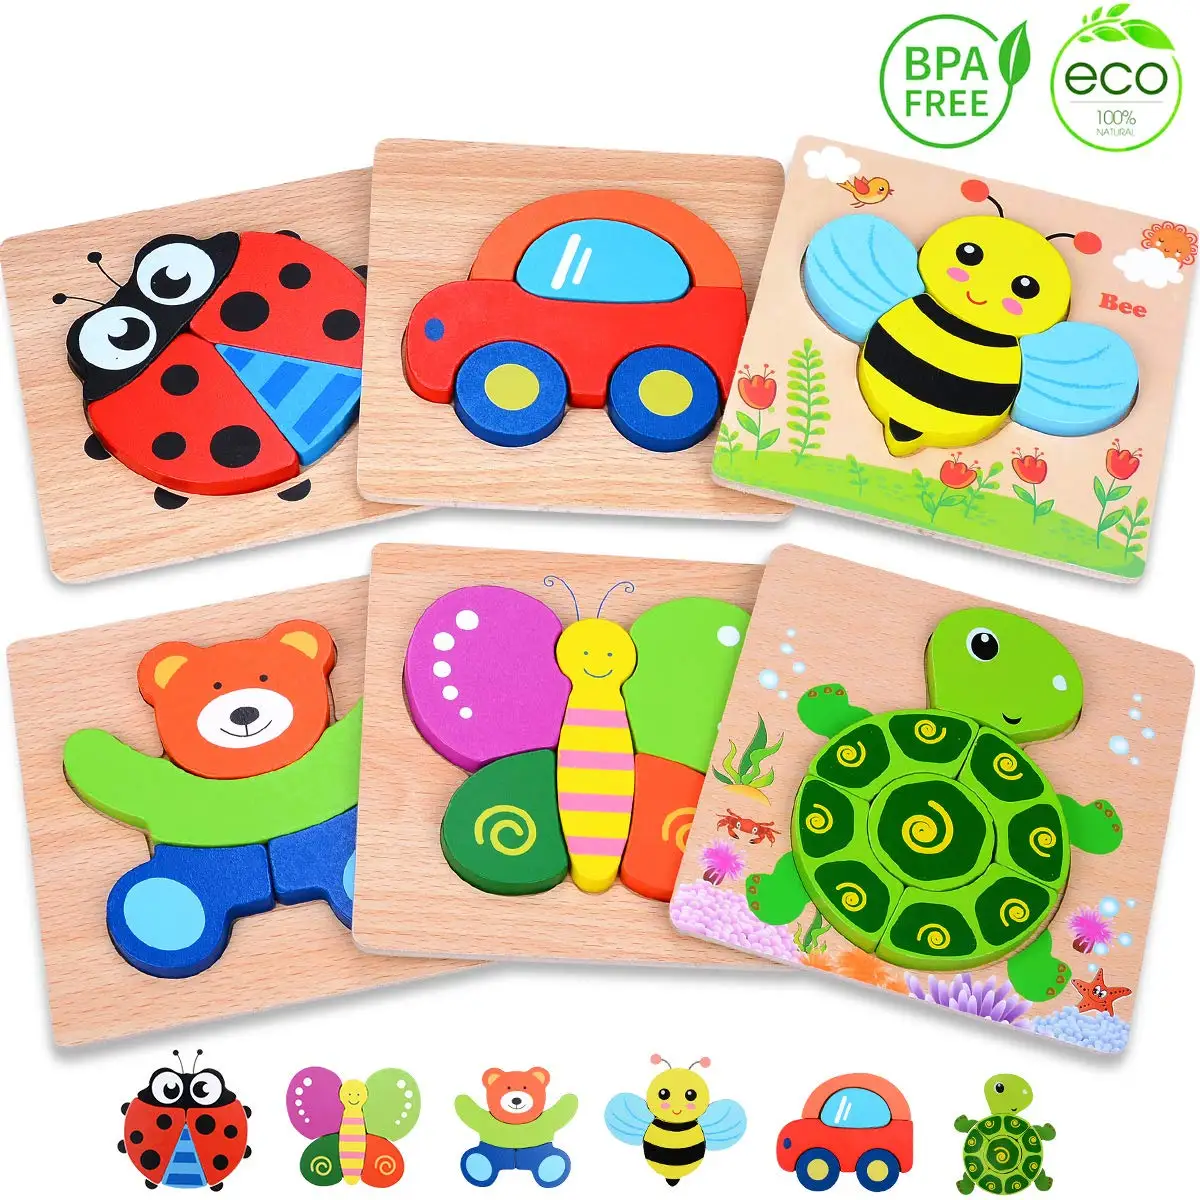 Wooden Jigsaw Puzzles for Toddlers 6-Packs Kids Puzzle 